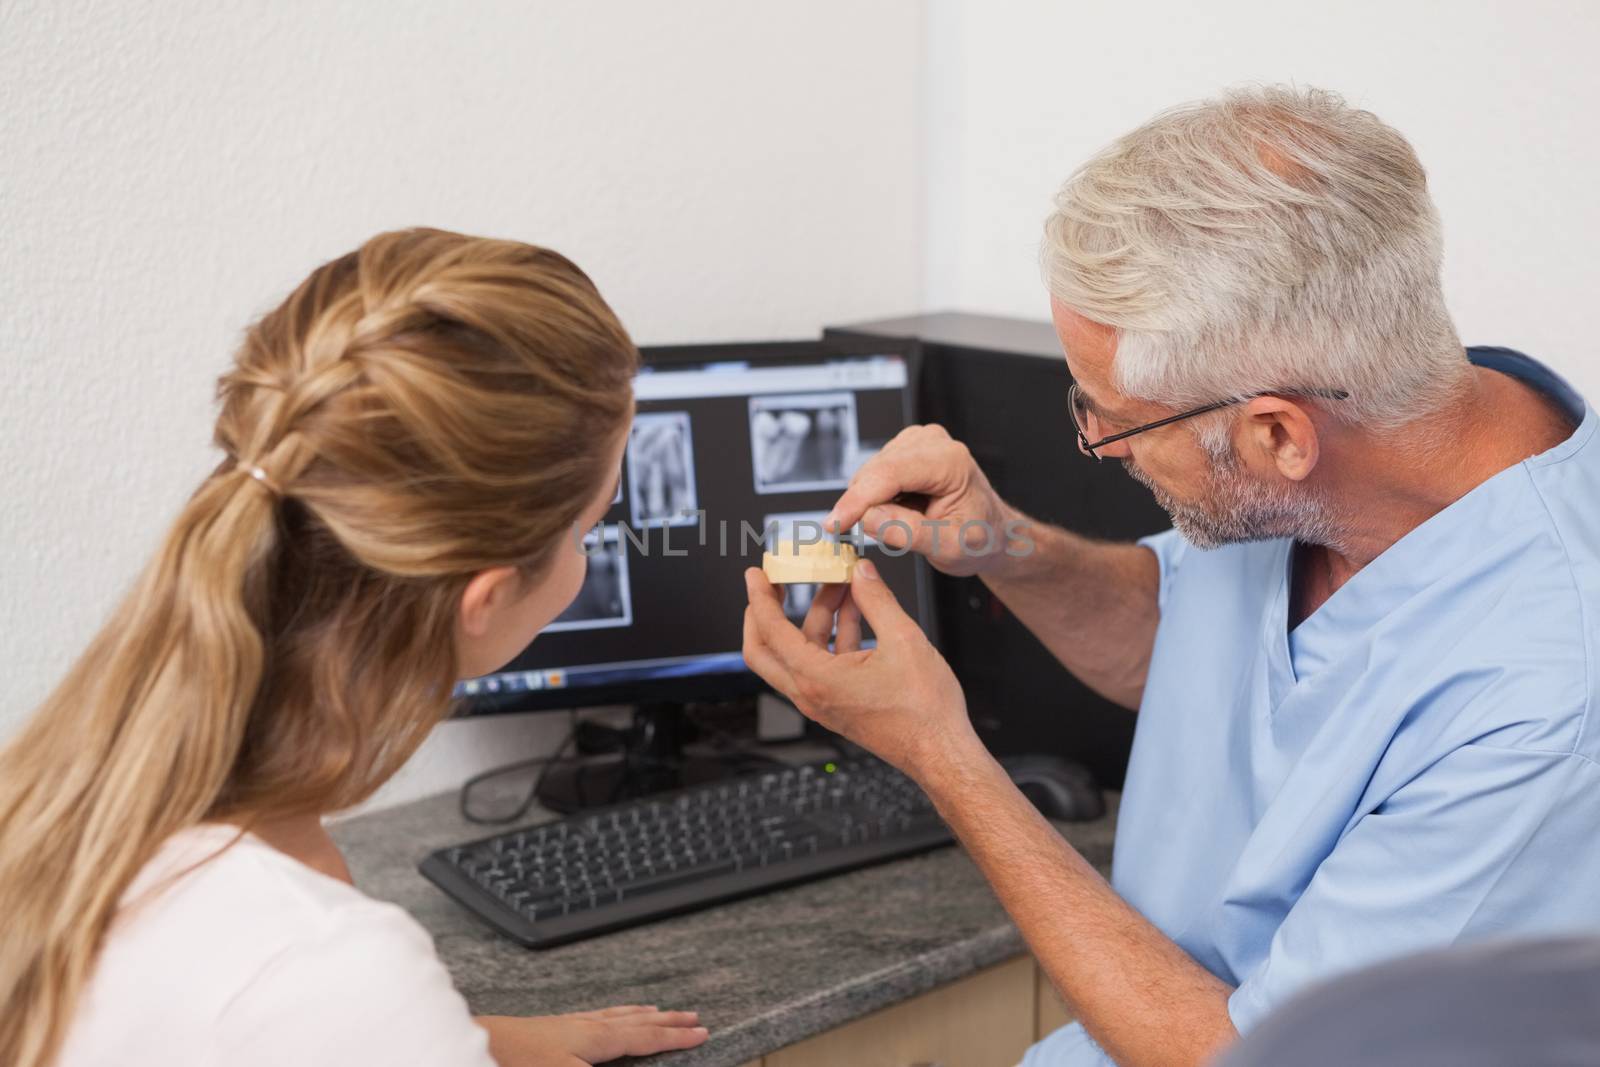 Dentist showing patient model of teeth and xrays at the dental clinic